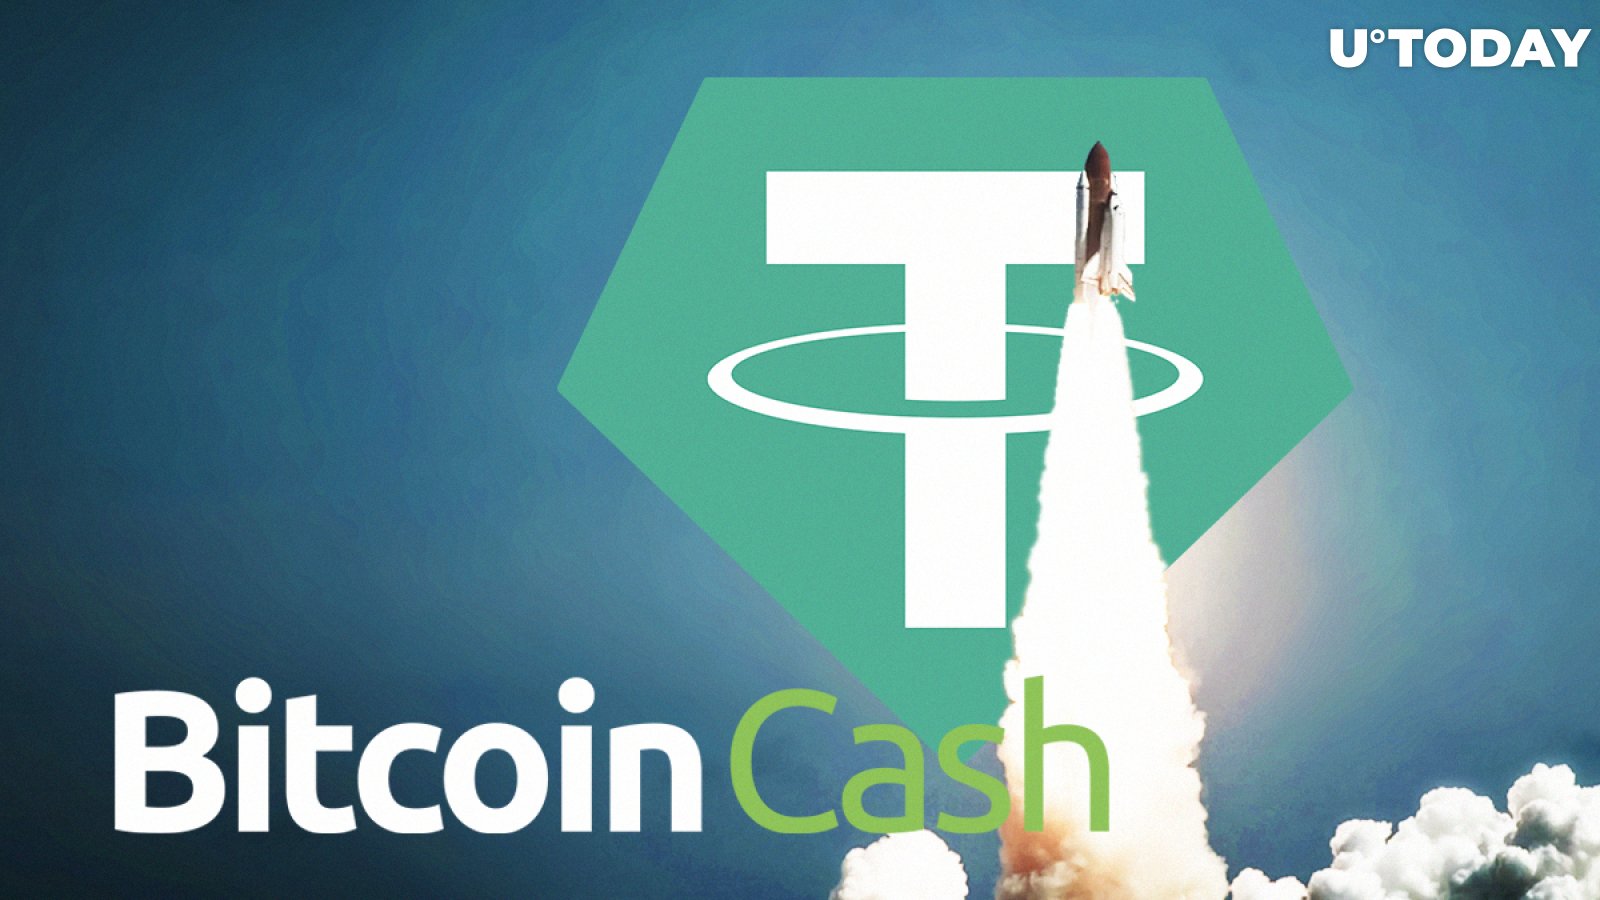 Tether (USDT) to Launch on Top of Bitcoin Cash (BCH) Blockchain